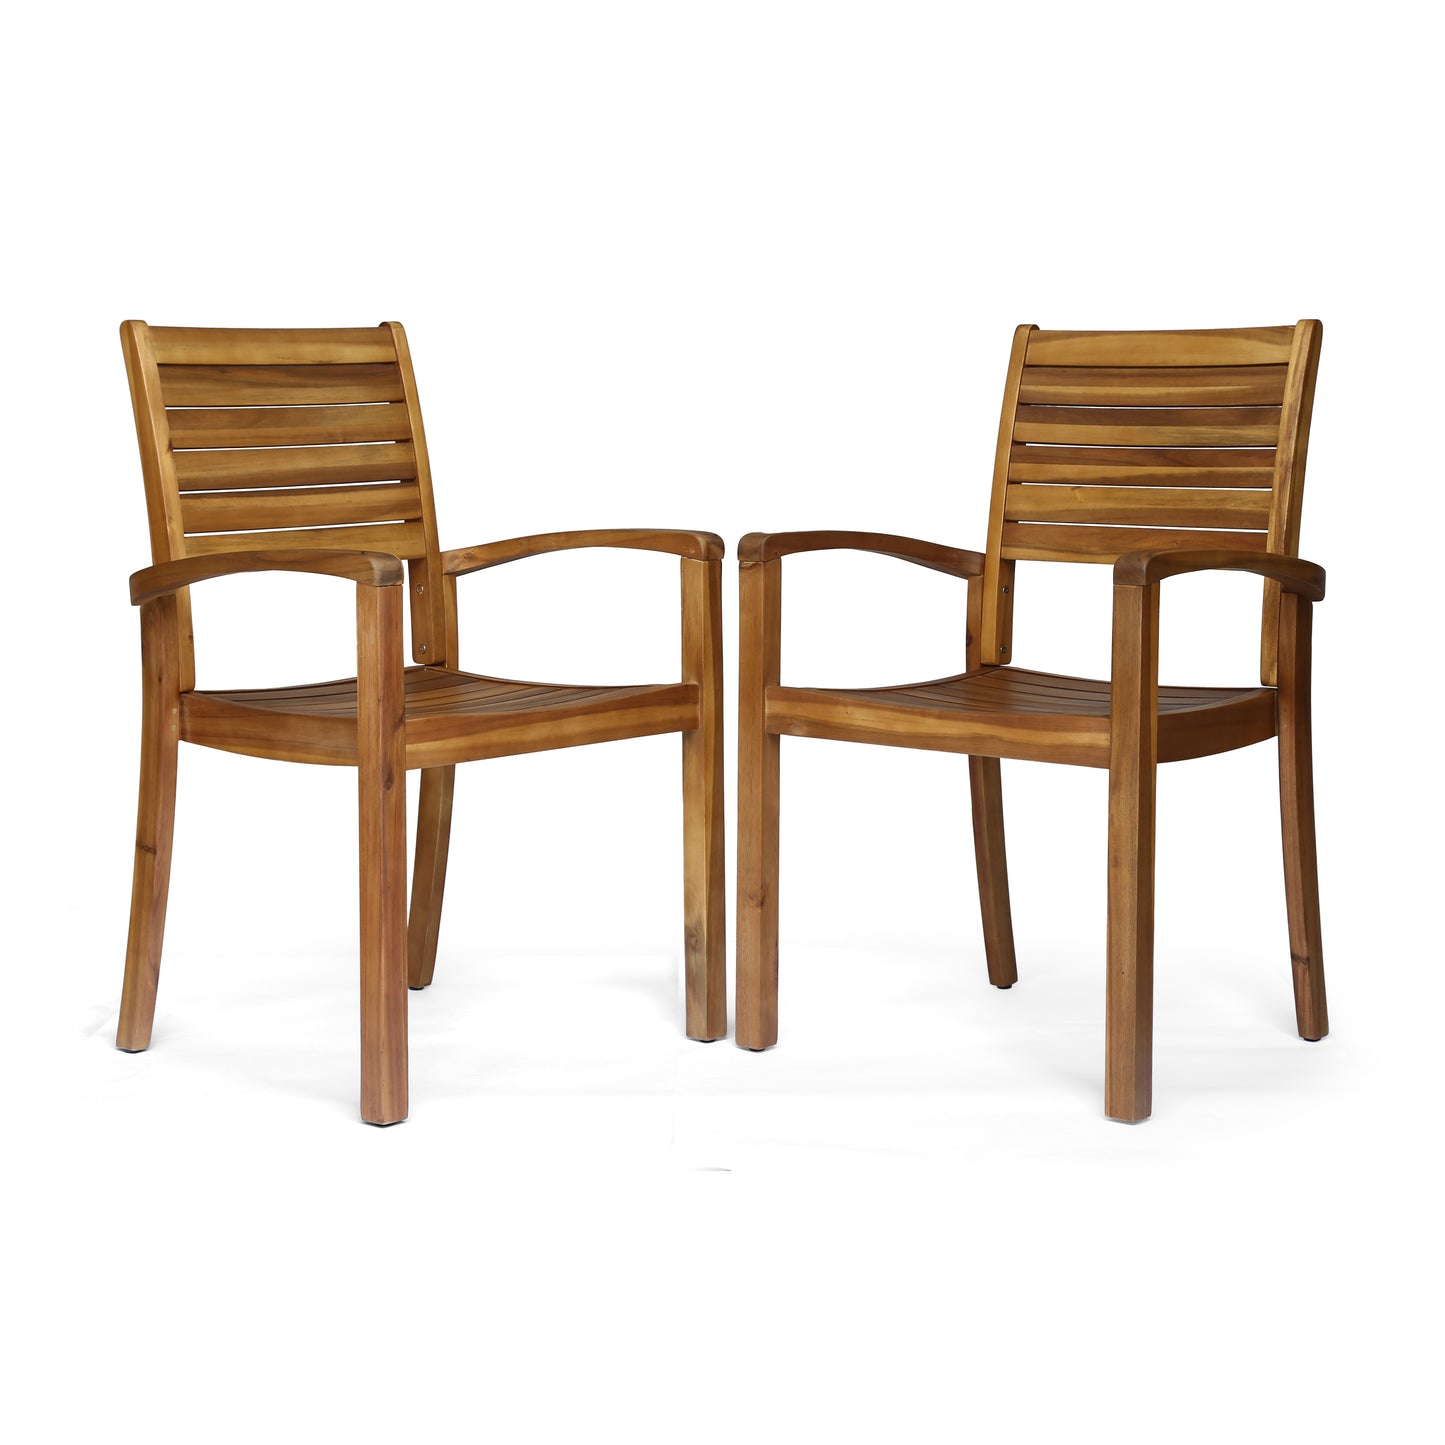 Watts Outdoor Acacia Wood Dining Chairs (set of 2)